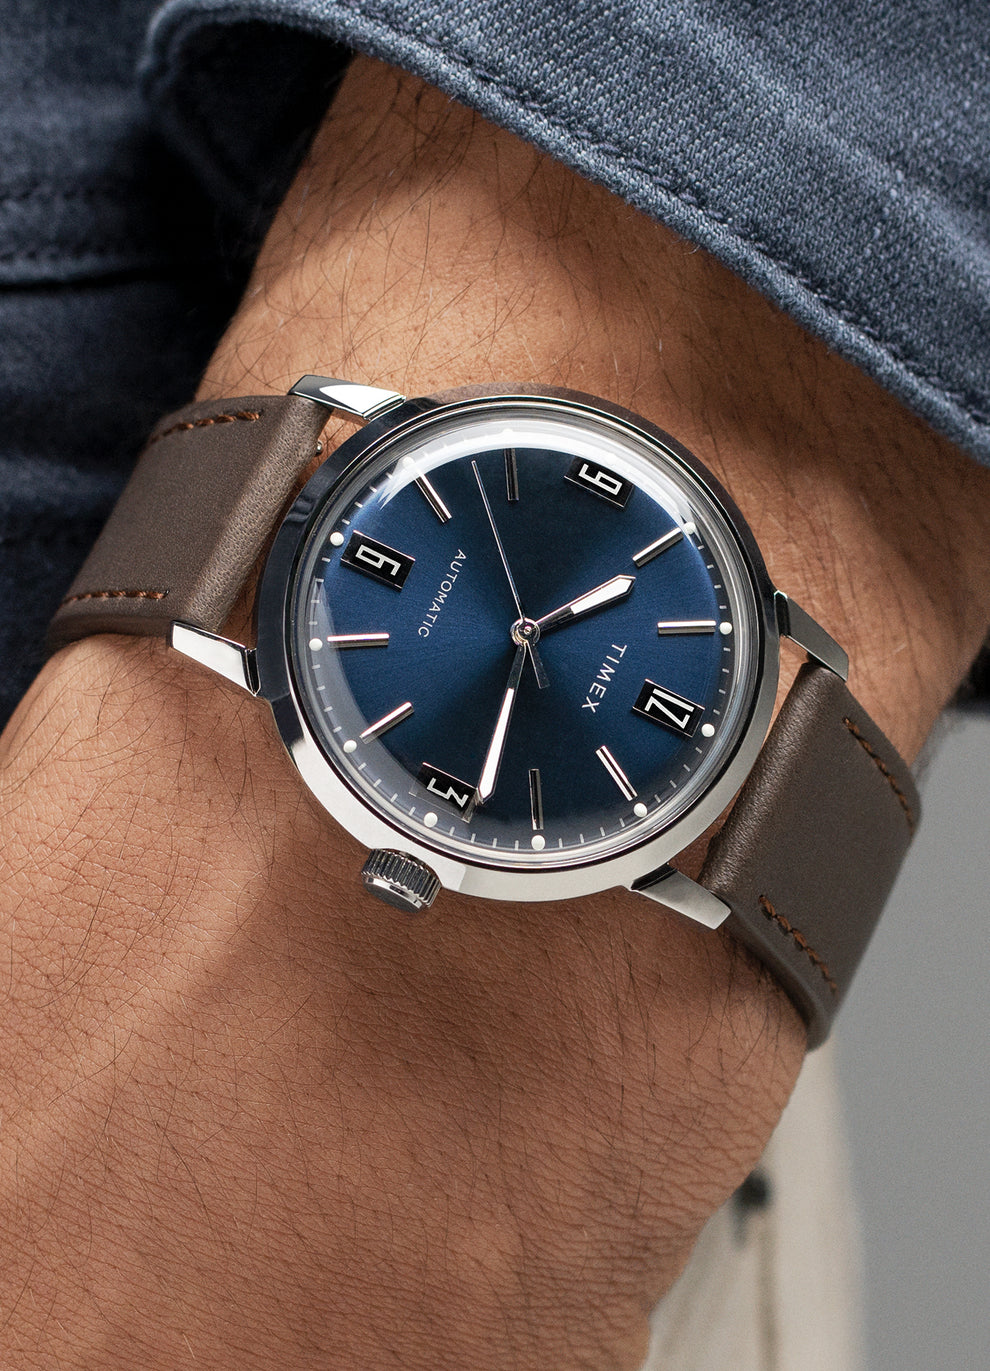 Marlin Automatic in blue on a man's wrist